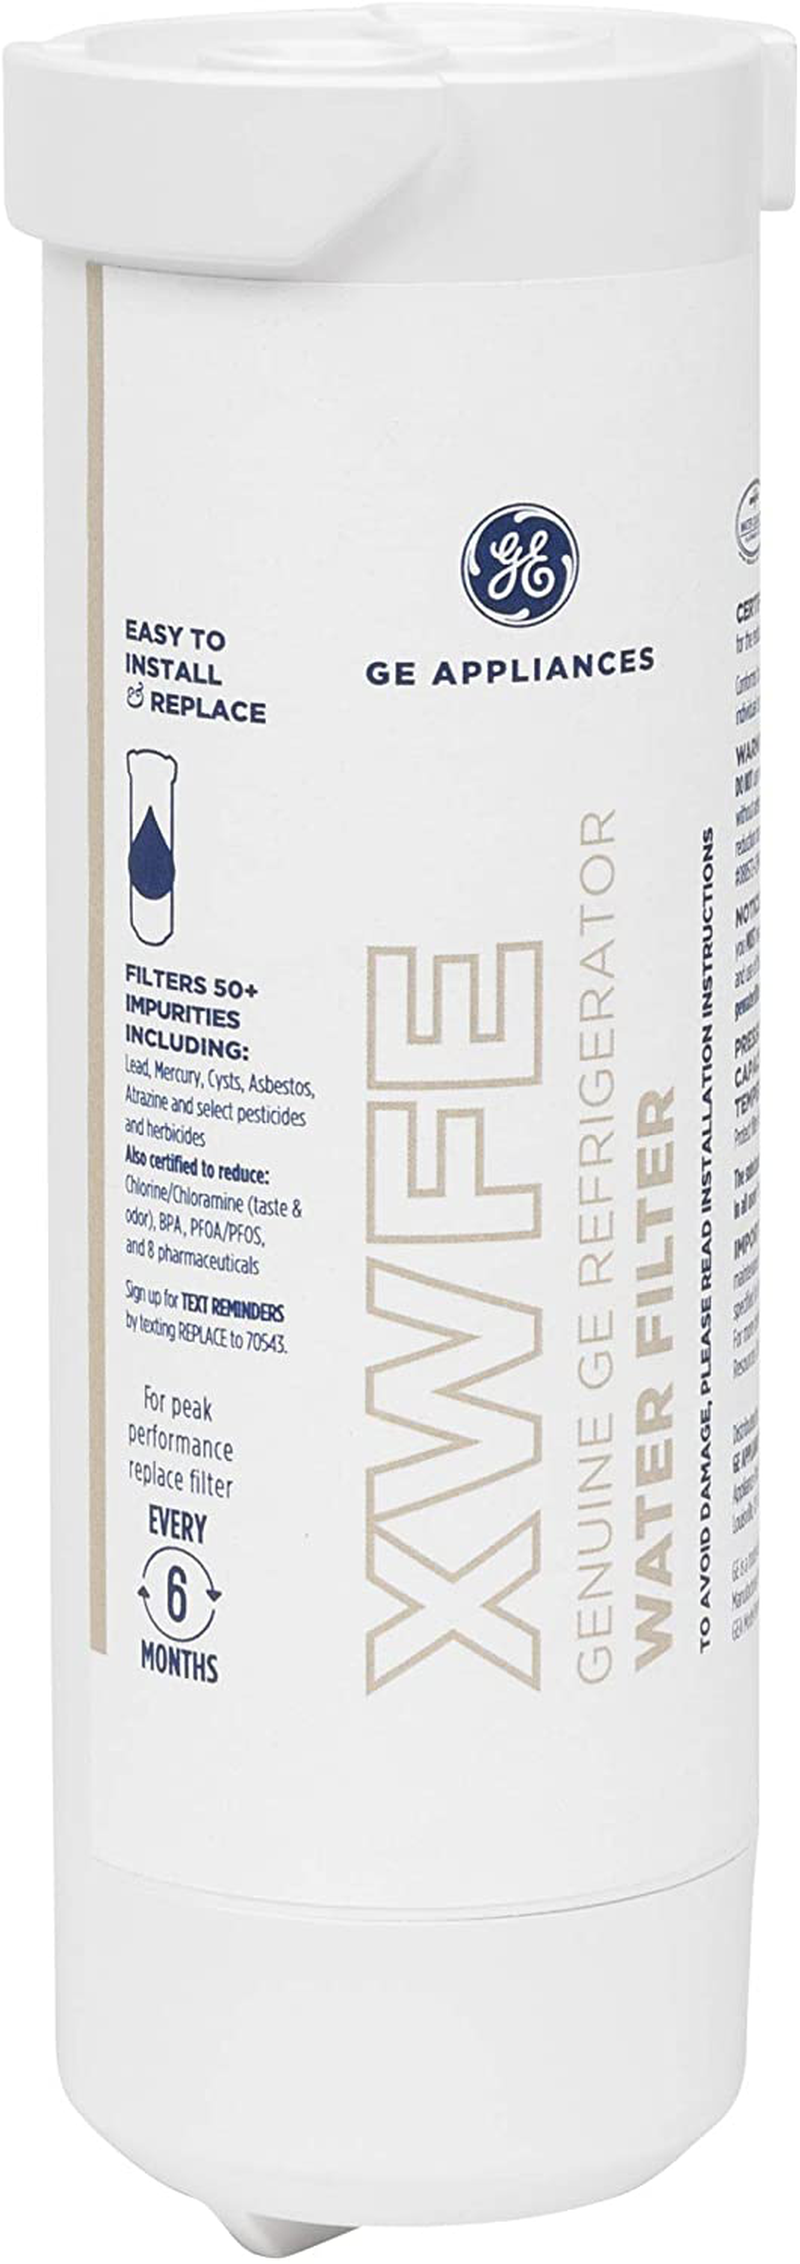 GE XWFE XWF Refrigerator Water Filter, 1 Count (Pack of 1), White